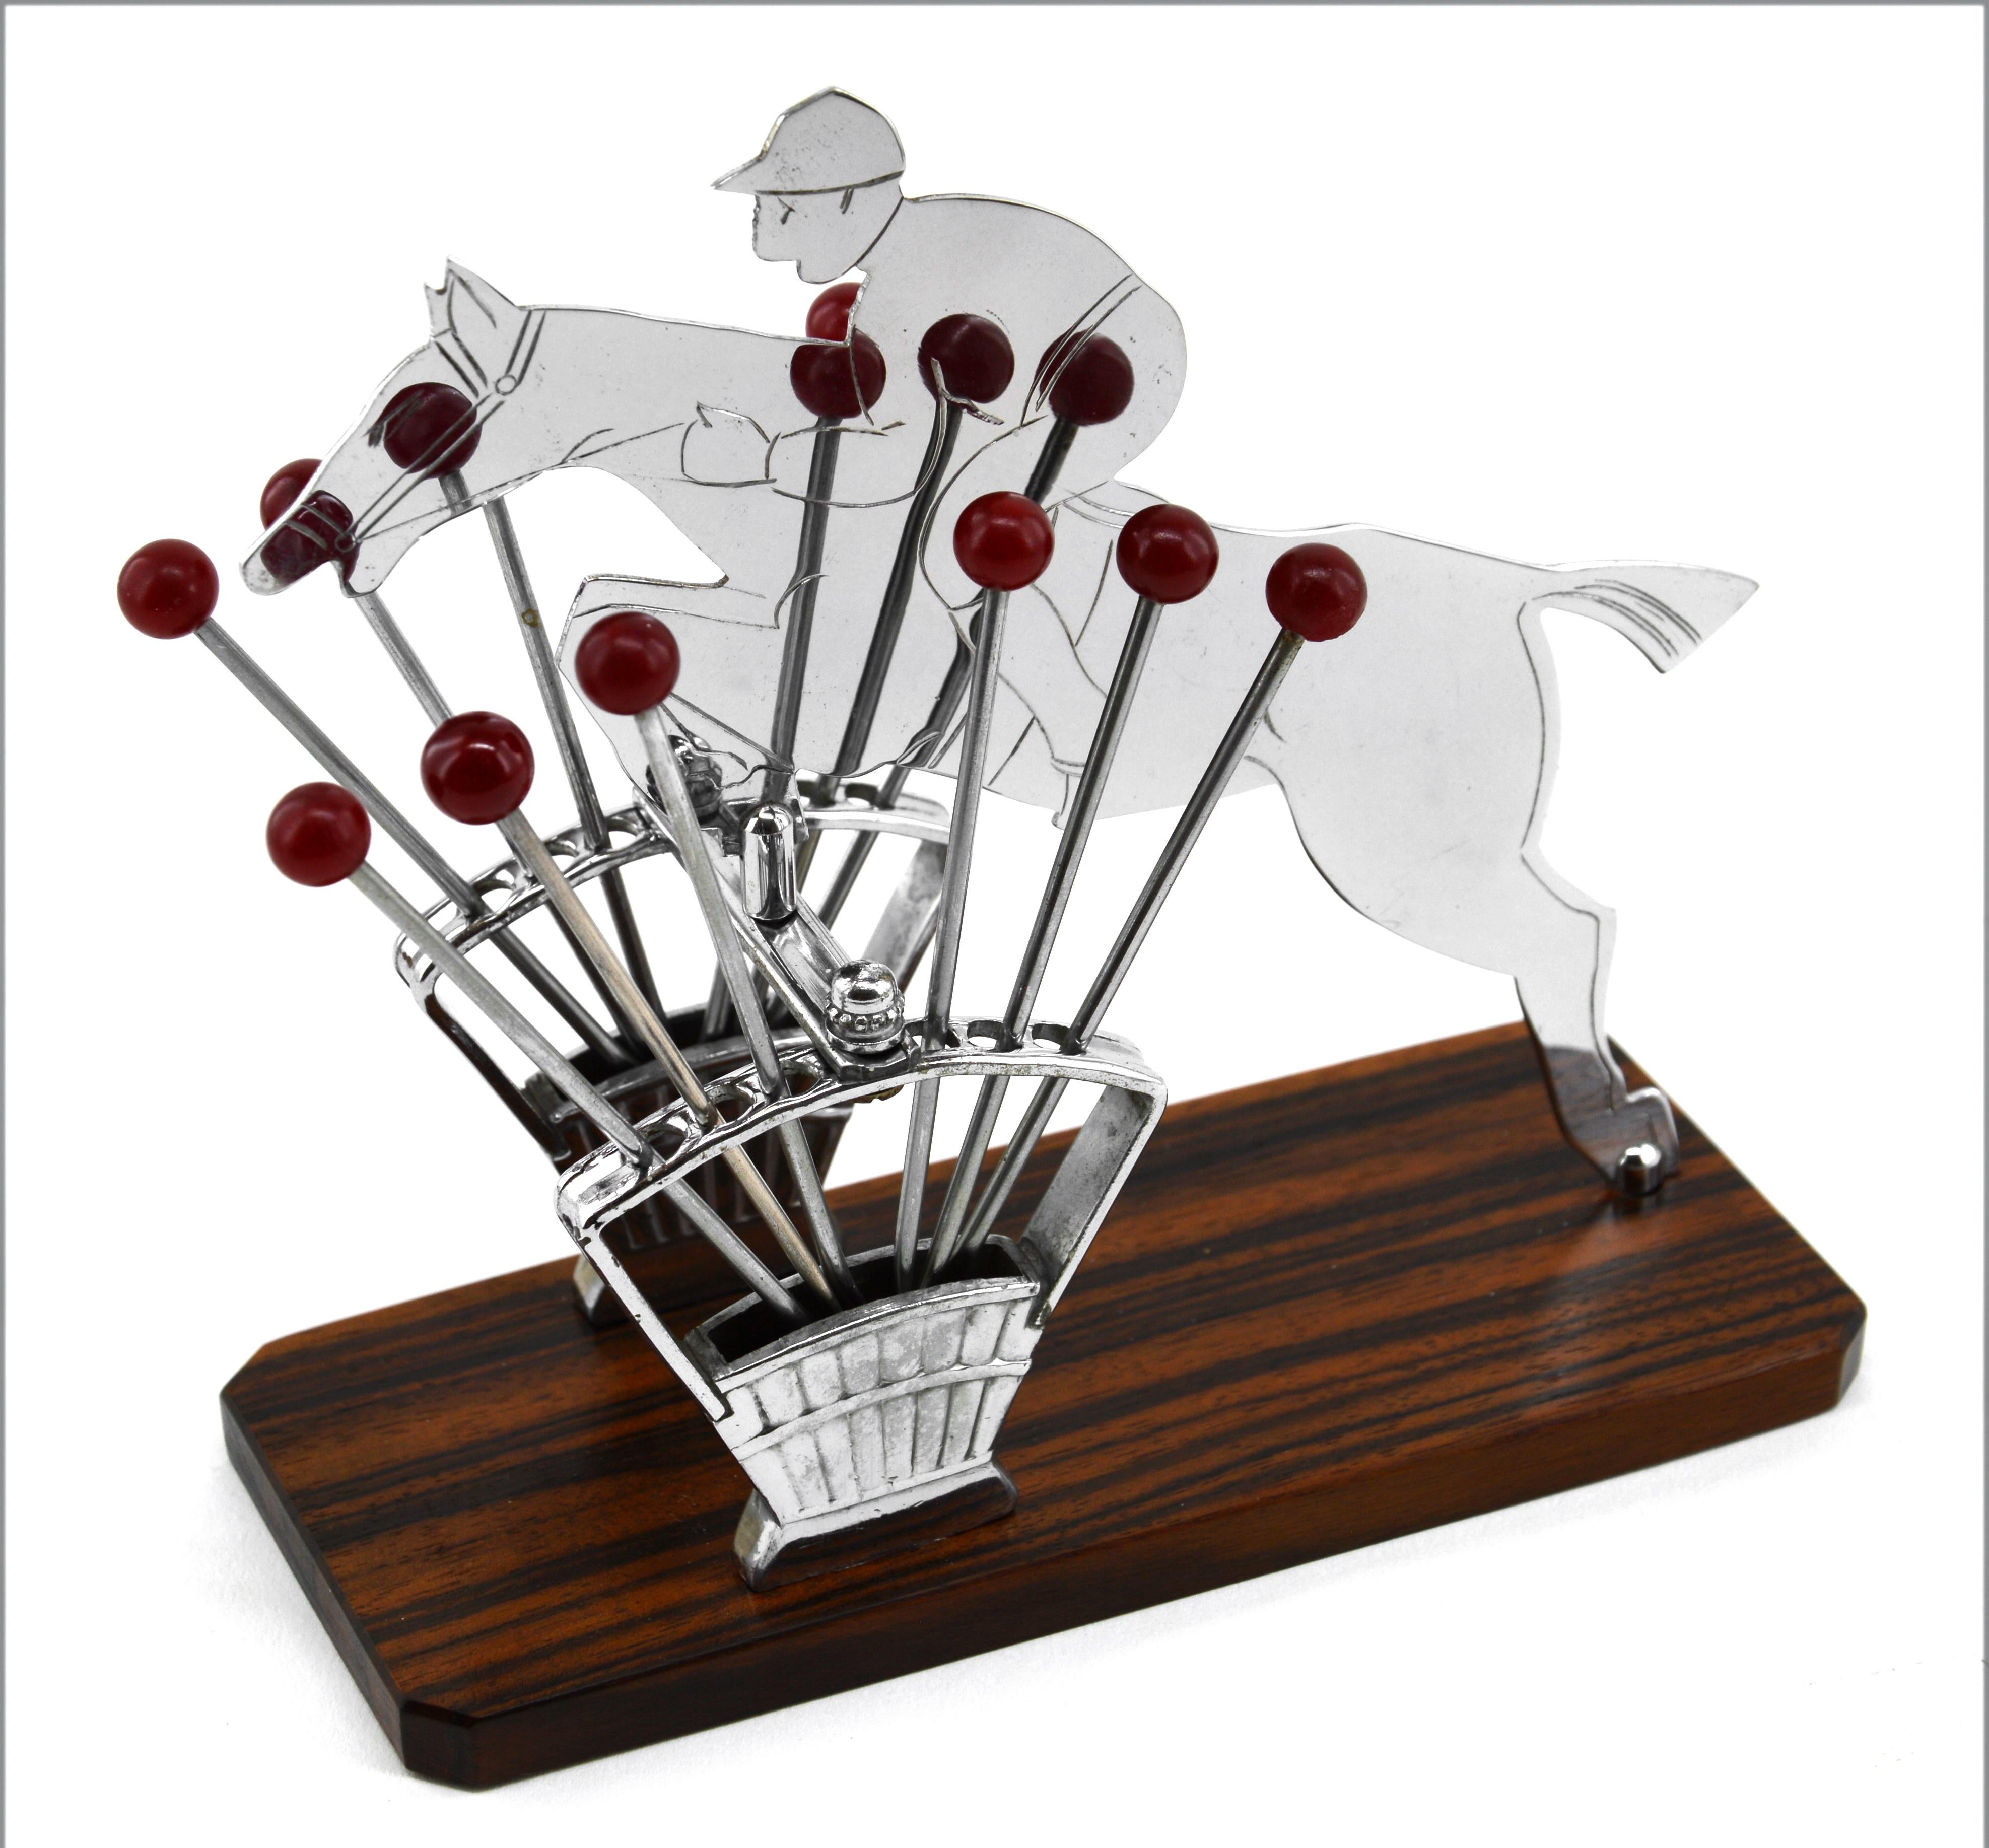 Mid-20th Century French Art Deco Show Jumping Cocktail Picks, 1930s For Sale